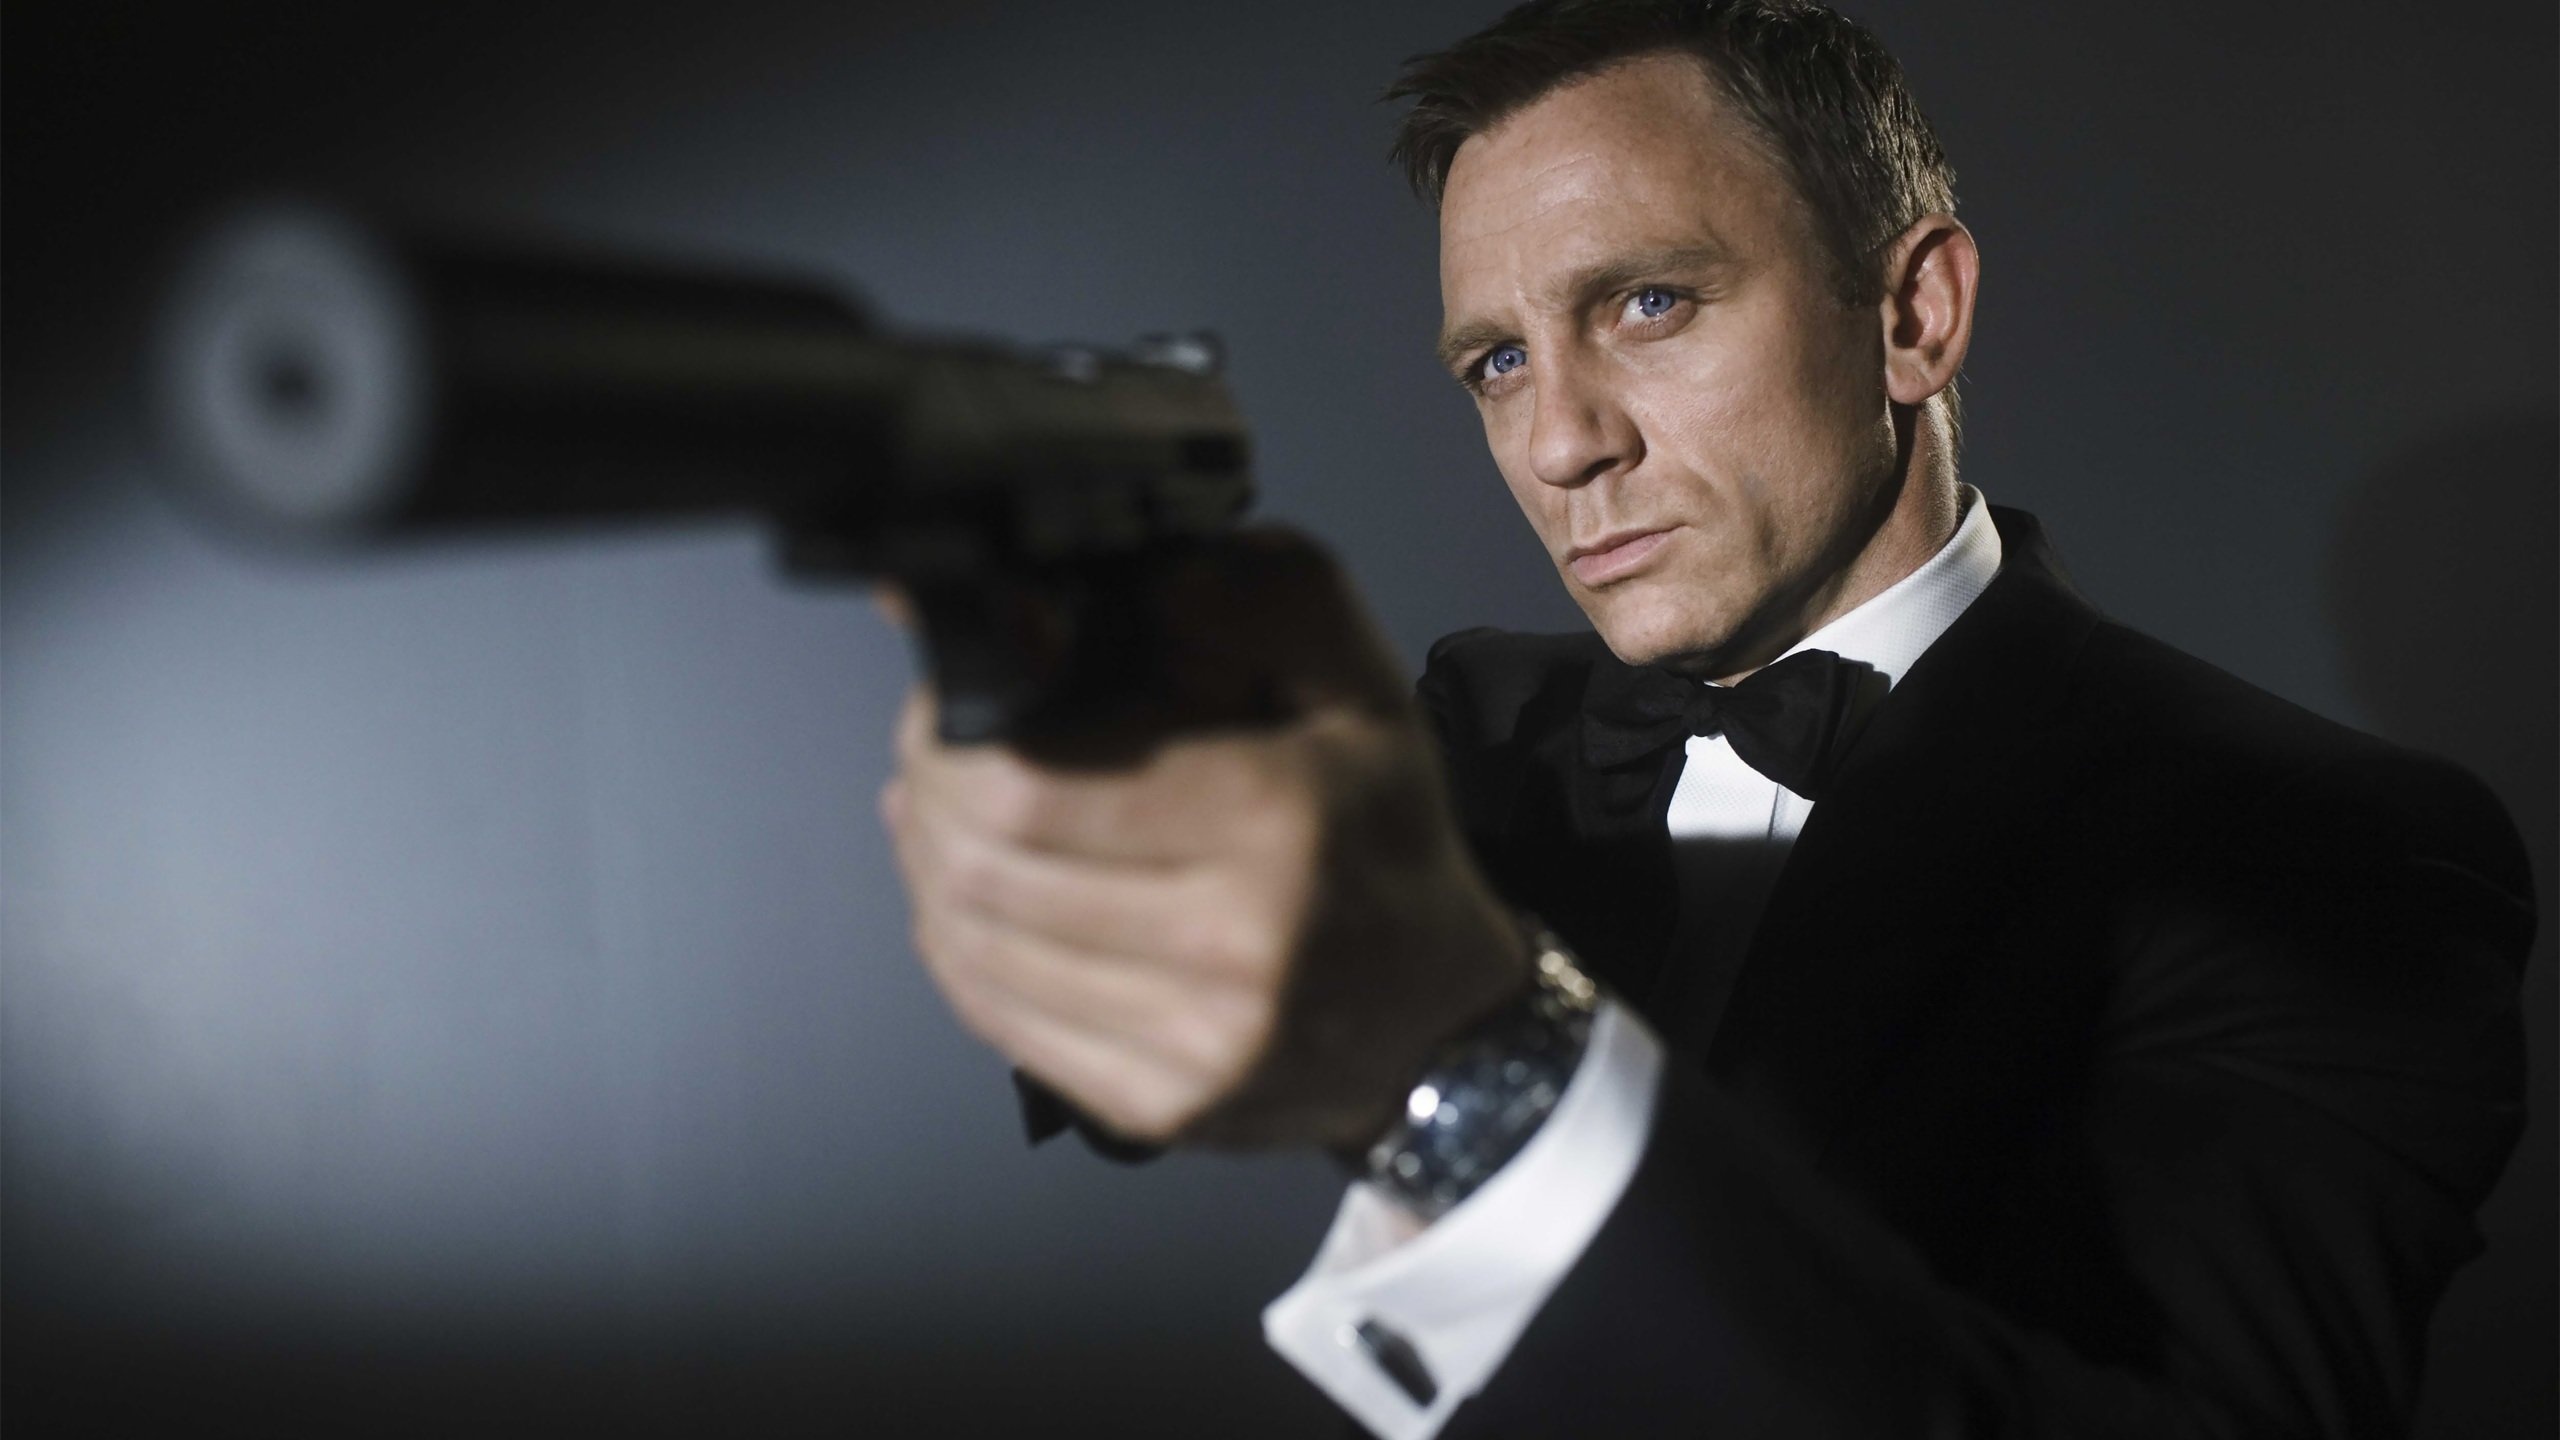 Casino Royale: The film stars Daniel Craig in his first appearance as Bond. 2560x1440 HD Background.